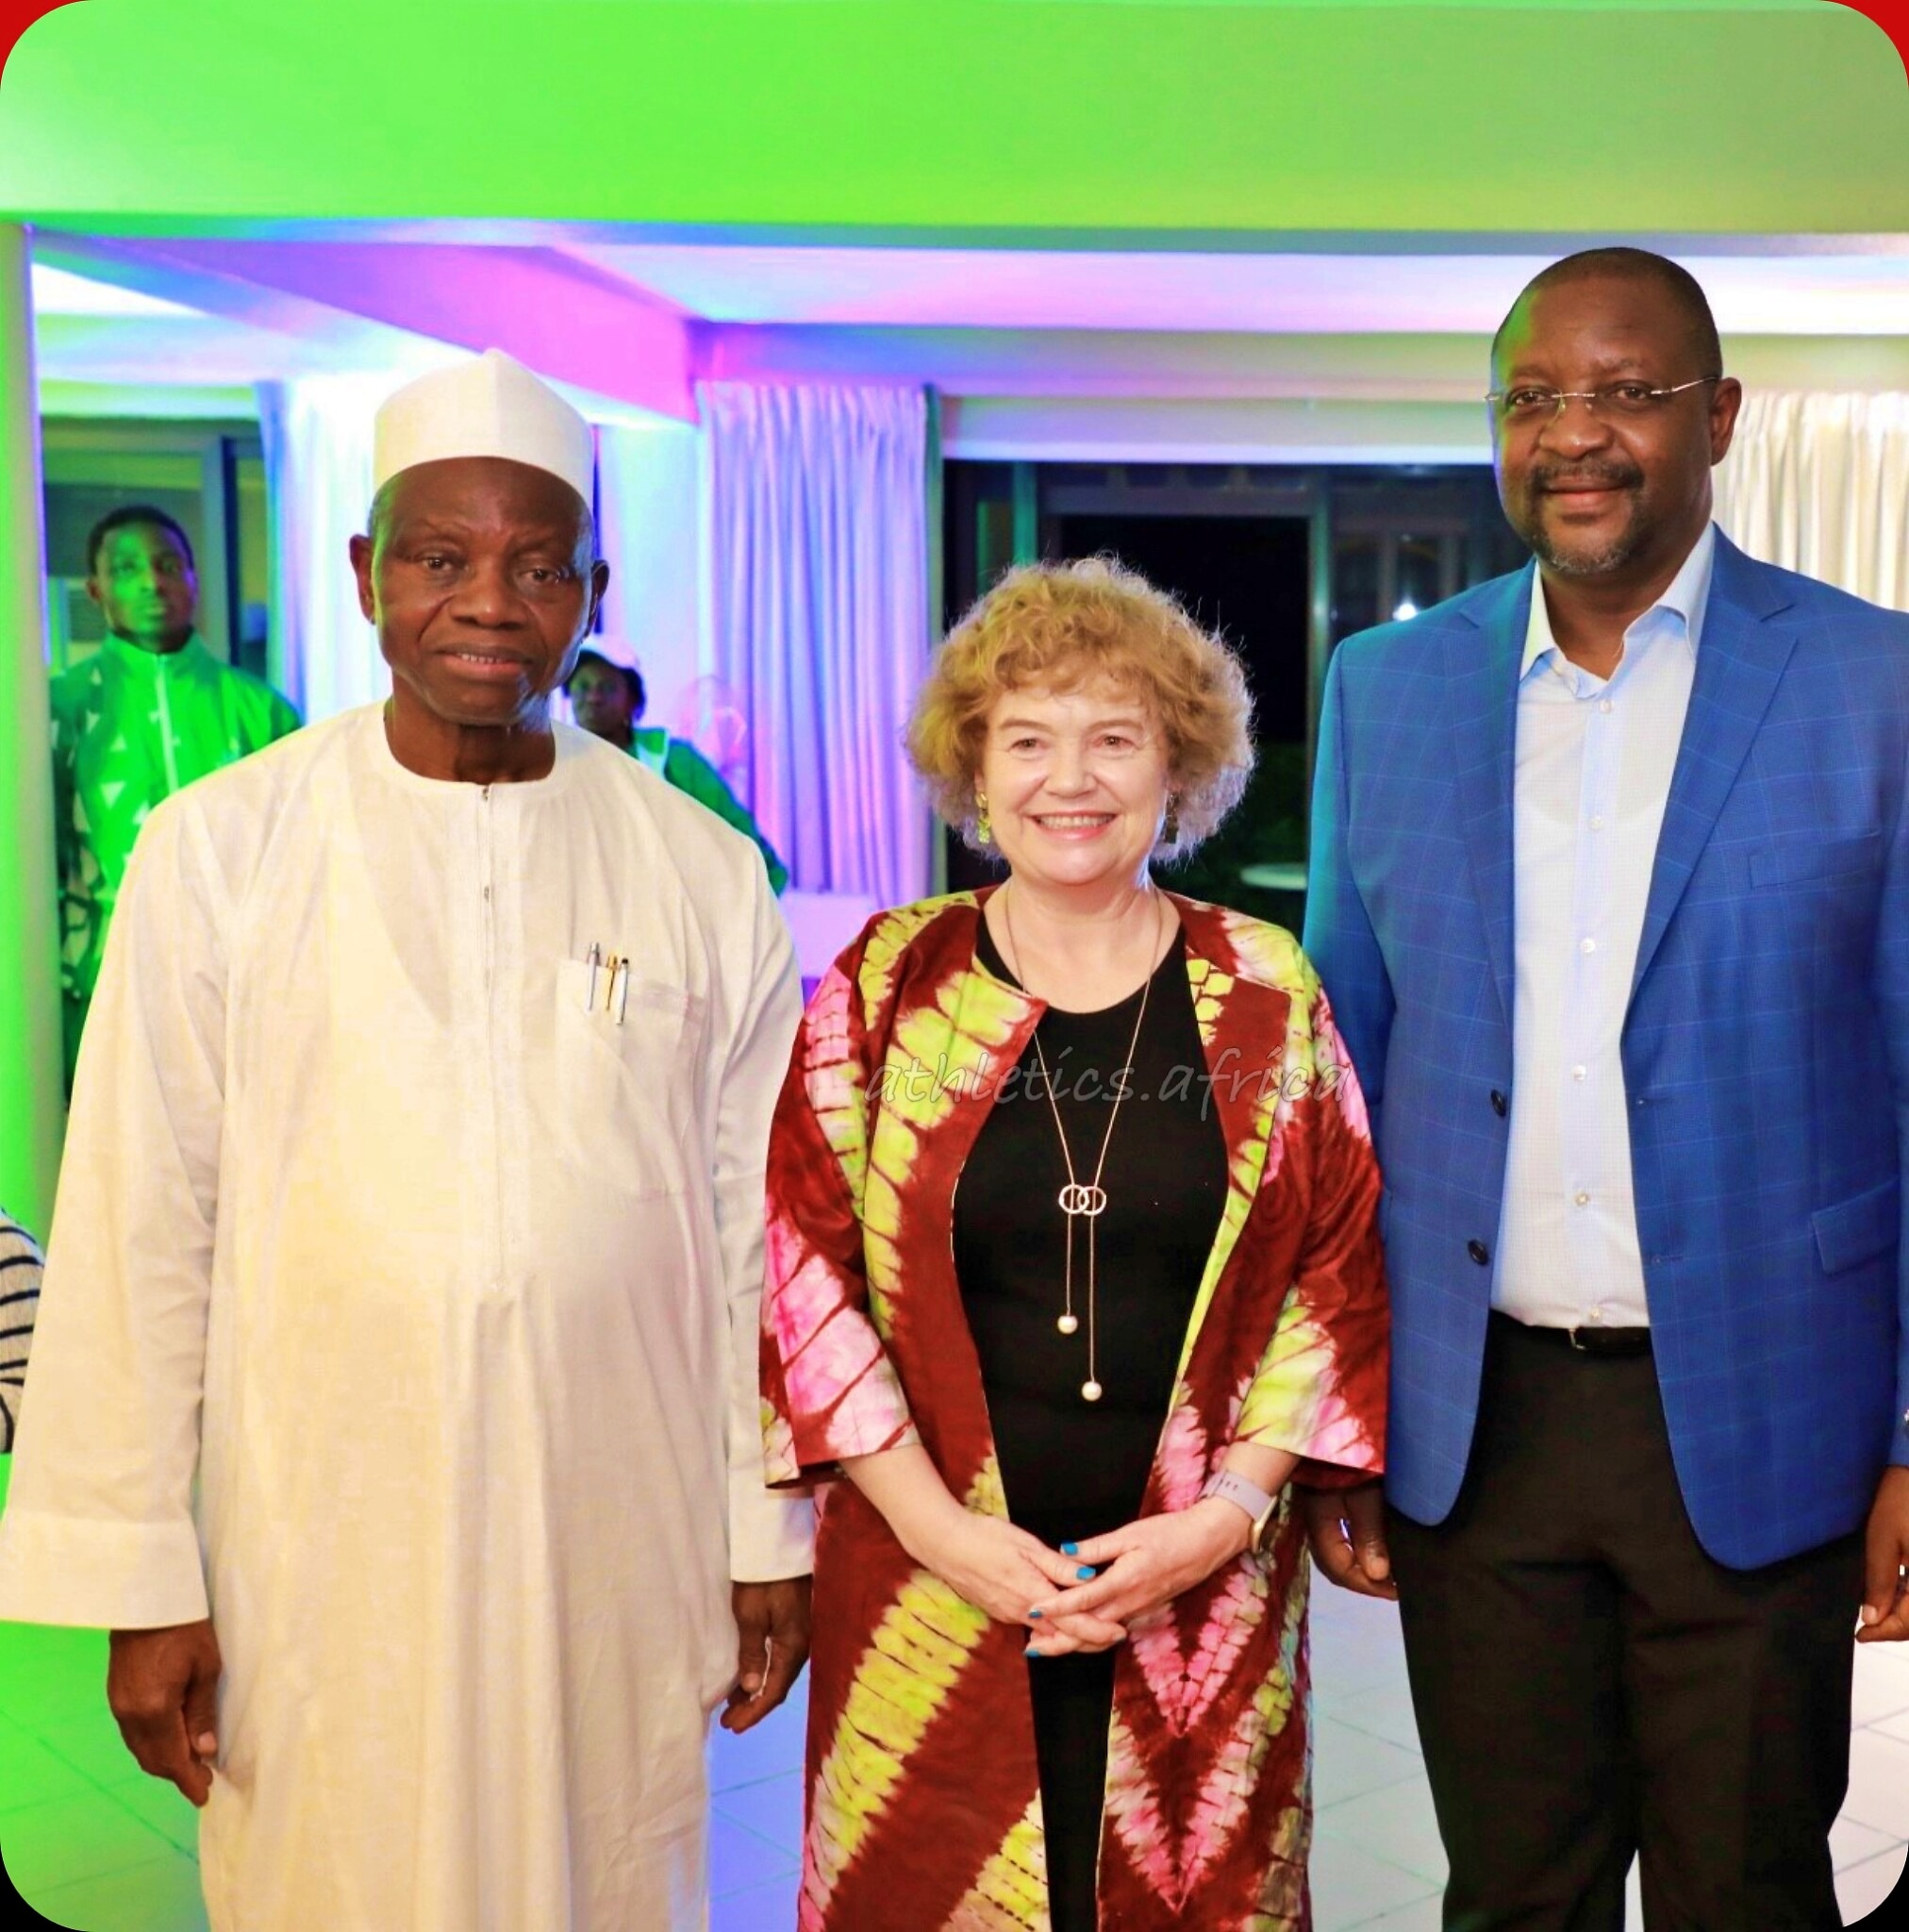 British High Commissioner, Catriona Laing, hosted a farewell reception for Birmingham Commonwealth Games bound Nigerian athletes, alongside the Minister of Sports Sunday Dare and Habu Gumel the President of the Nigerian Olympic Committee in Abuja.